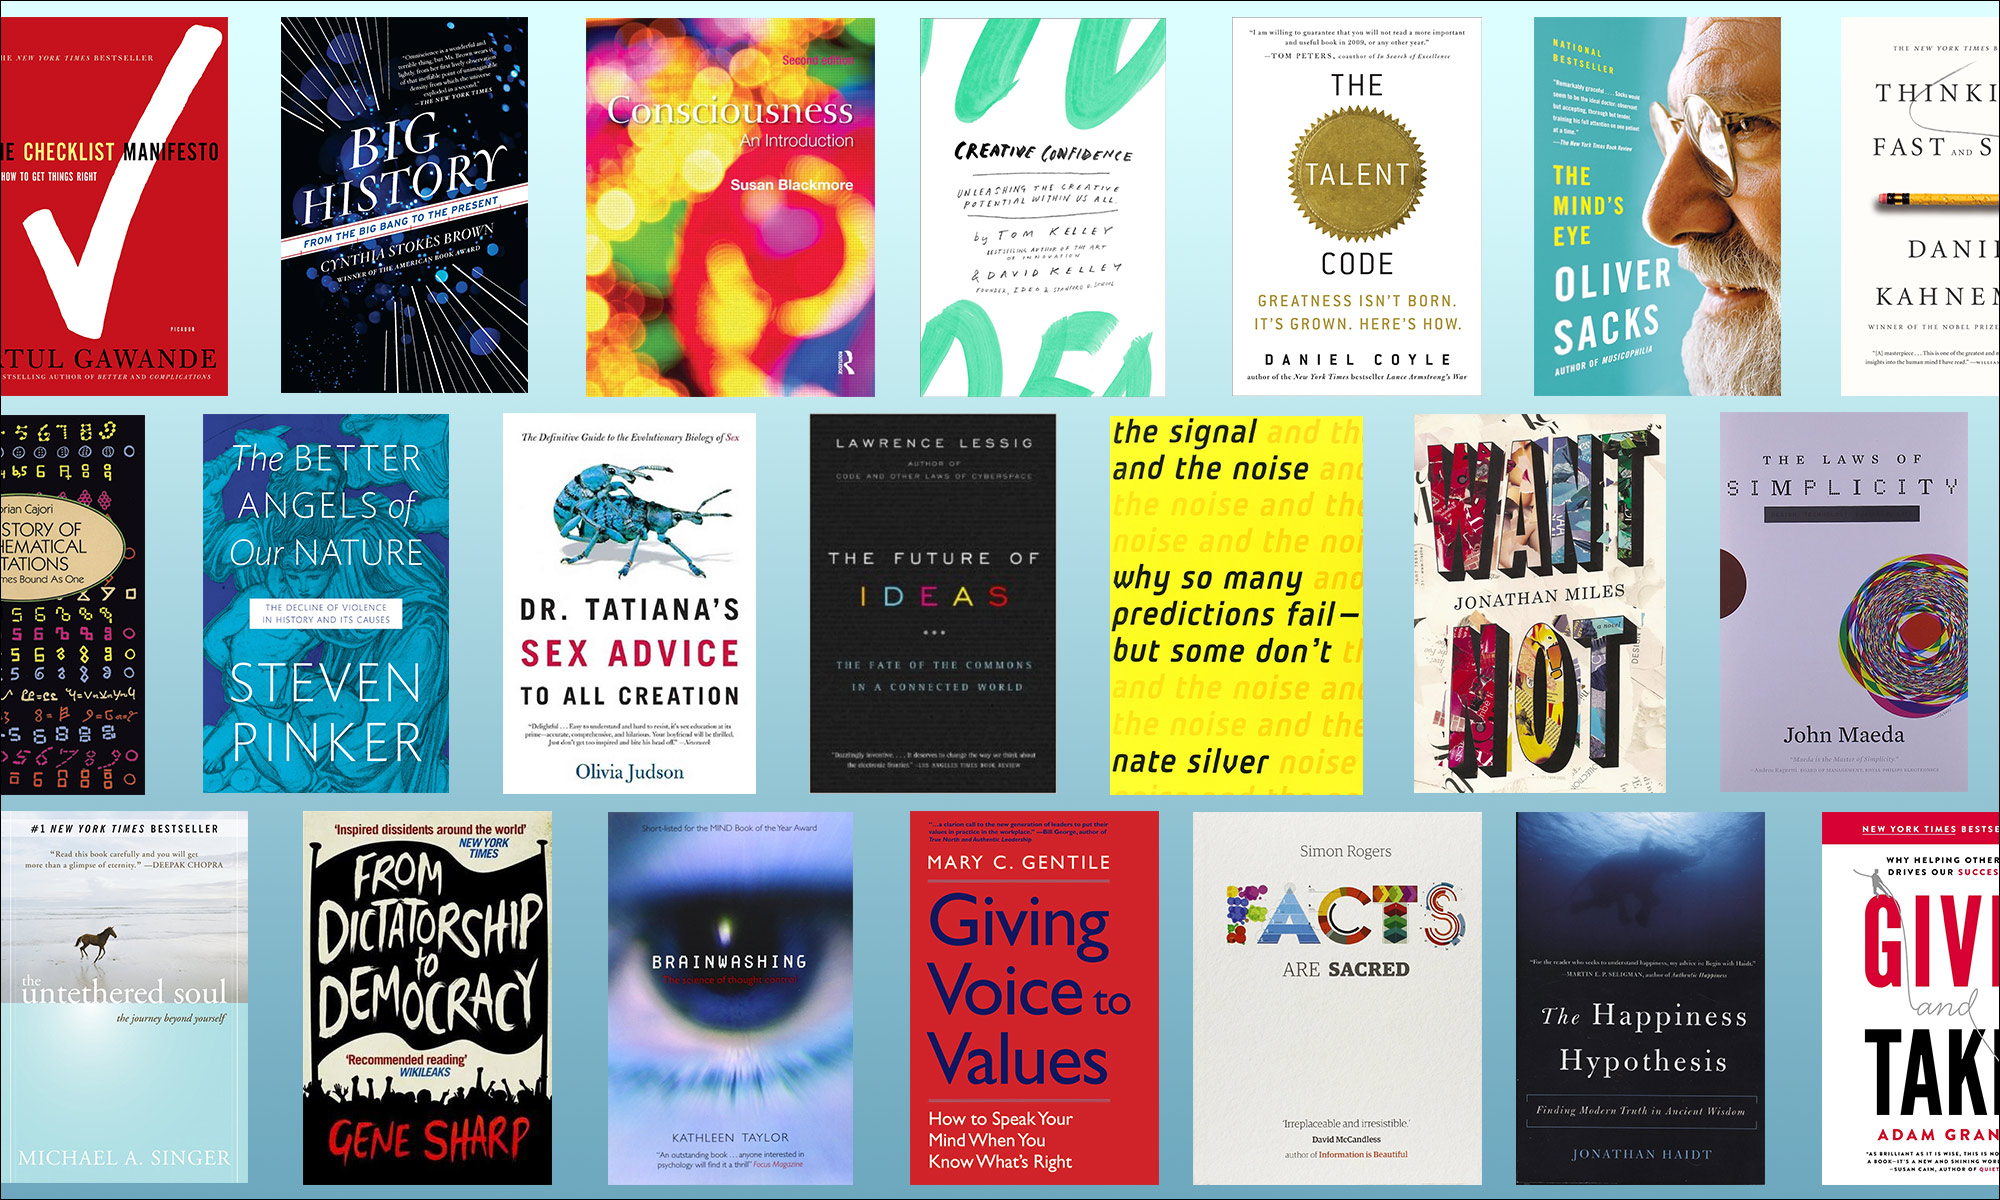 Adam Grant's List of 15 Great leaderships books to Read this Summer